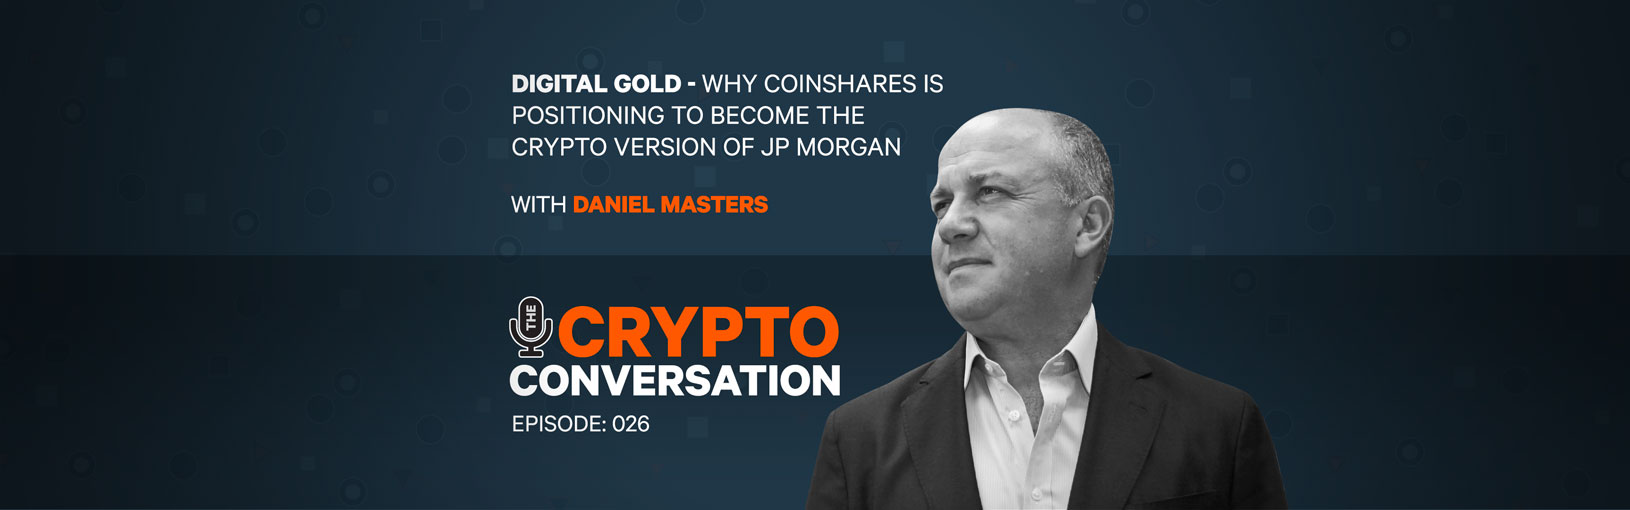 Digital Gold – How CoinShares is positioning to become the crypto version of JP Morgan